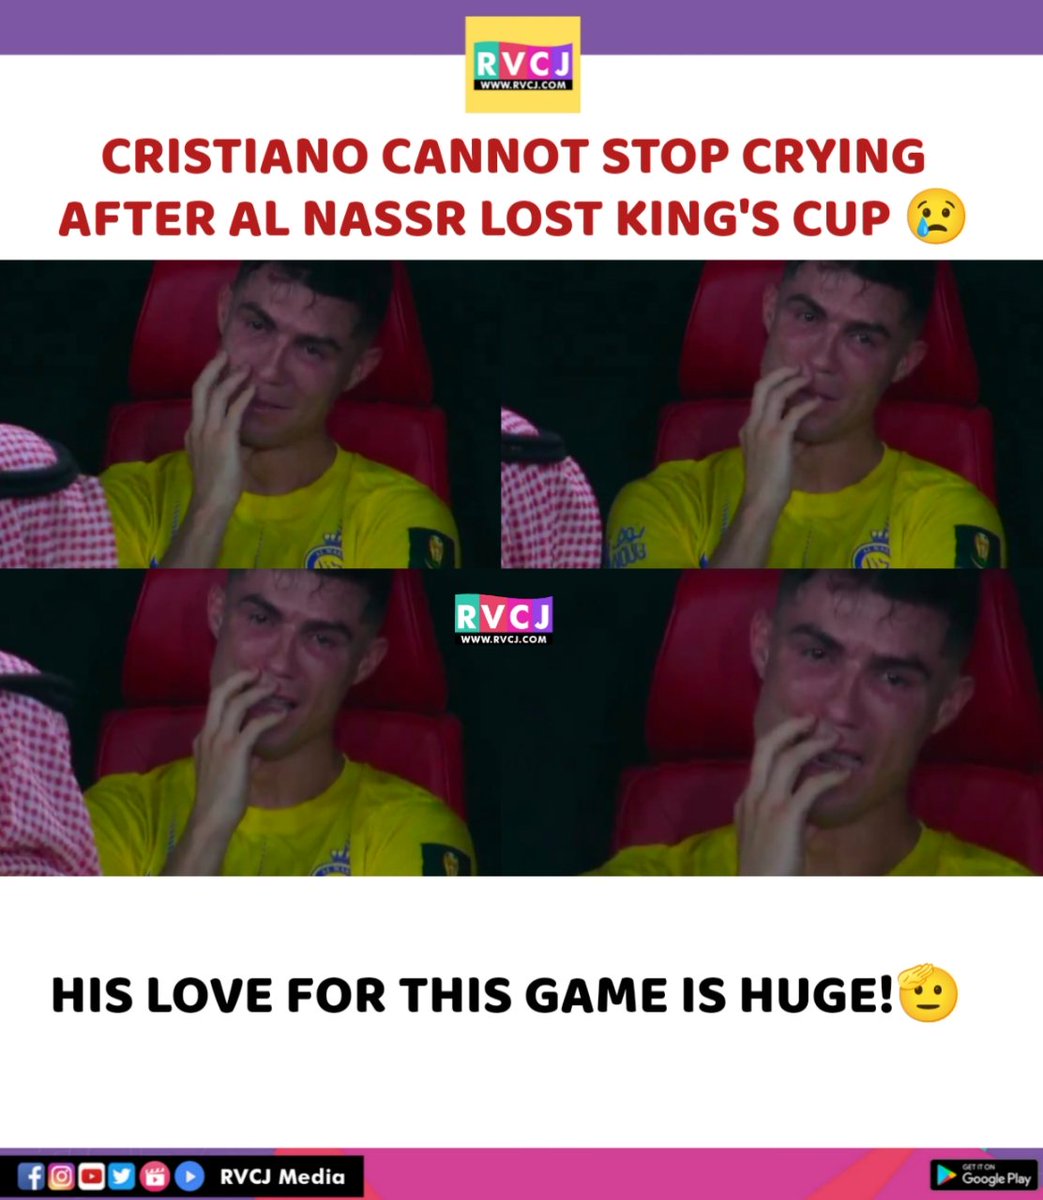 Cristiano cannot stop crying.